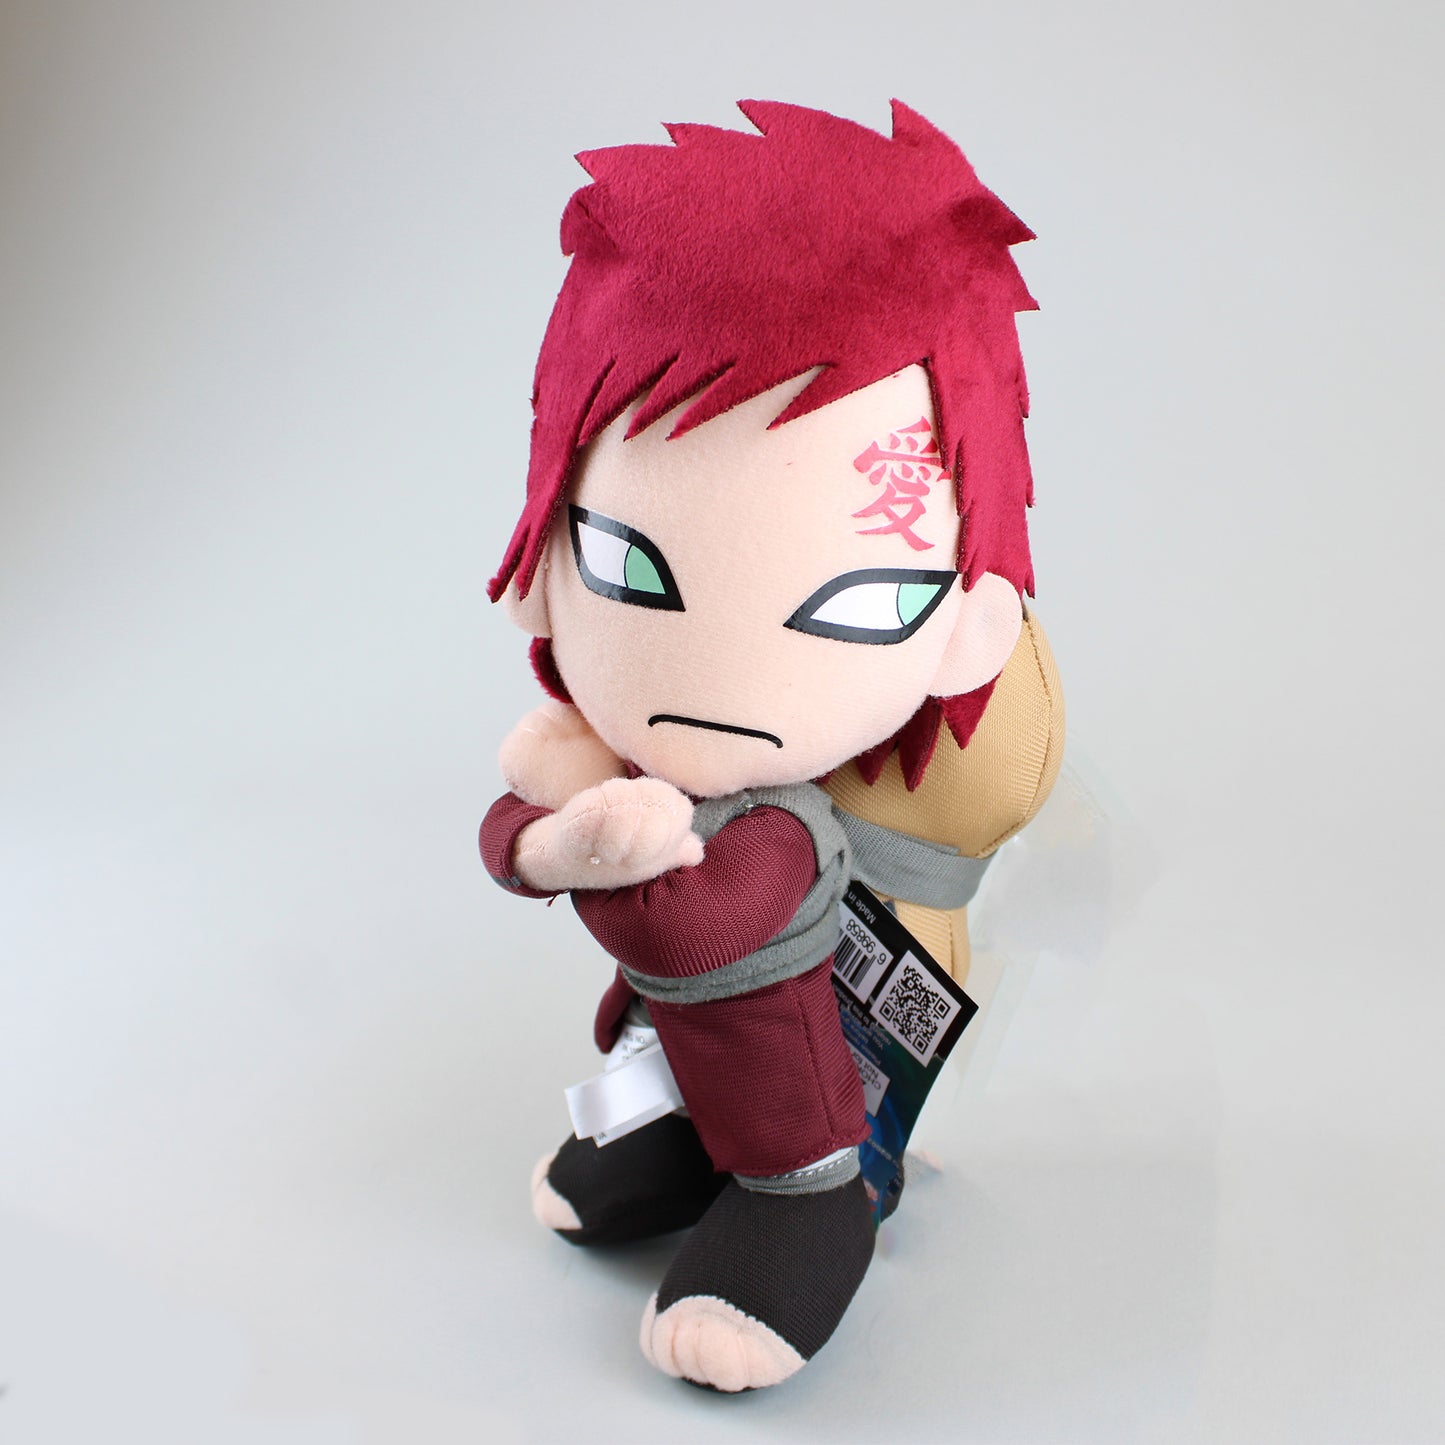 Official PAIN Naruto Shippuden 8 in. Plush Great Eastern (Nagato